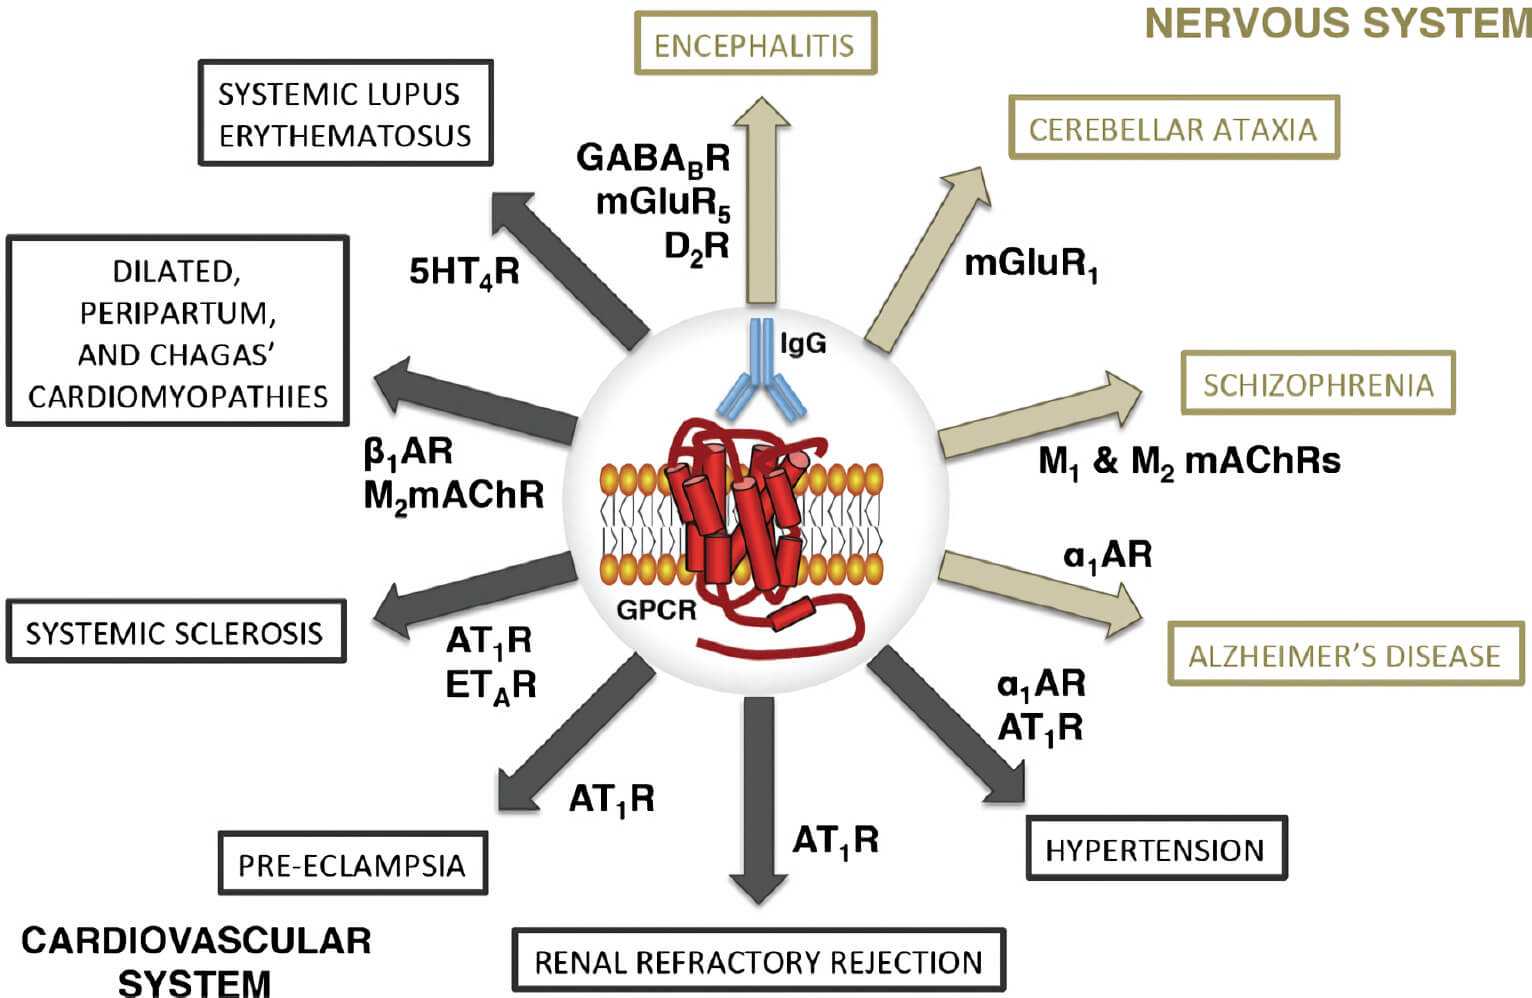 Examples of central nervous system and cardiovascular disorders mediated by endogenous autoantibodies.